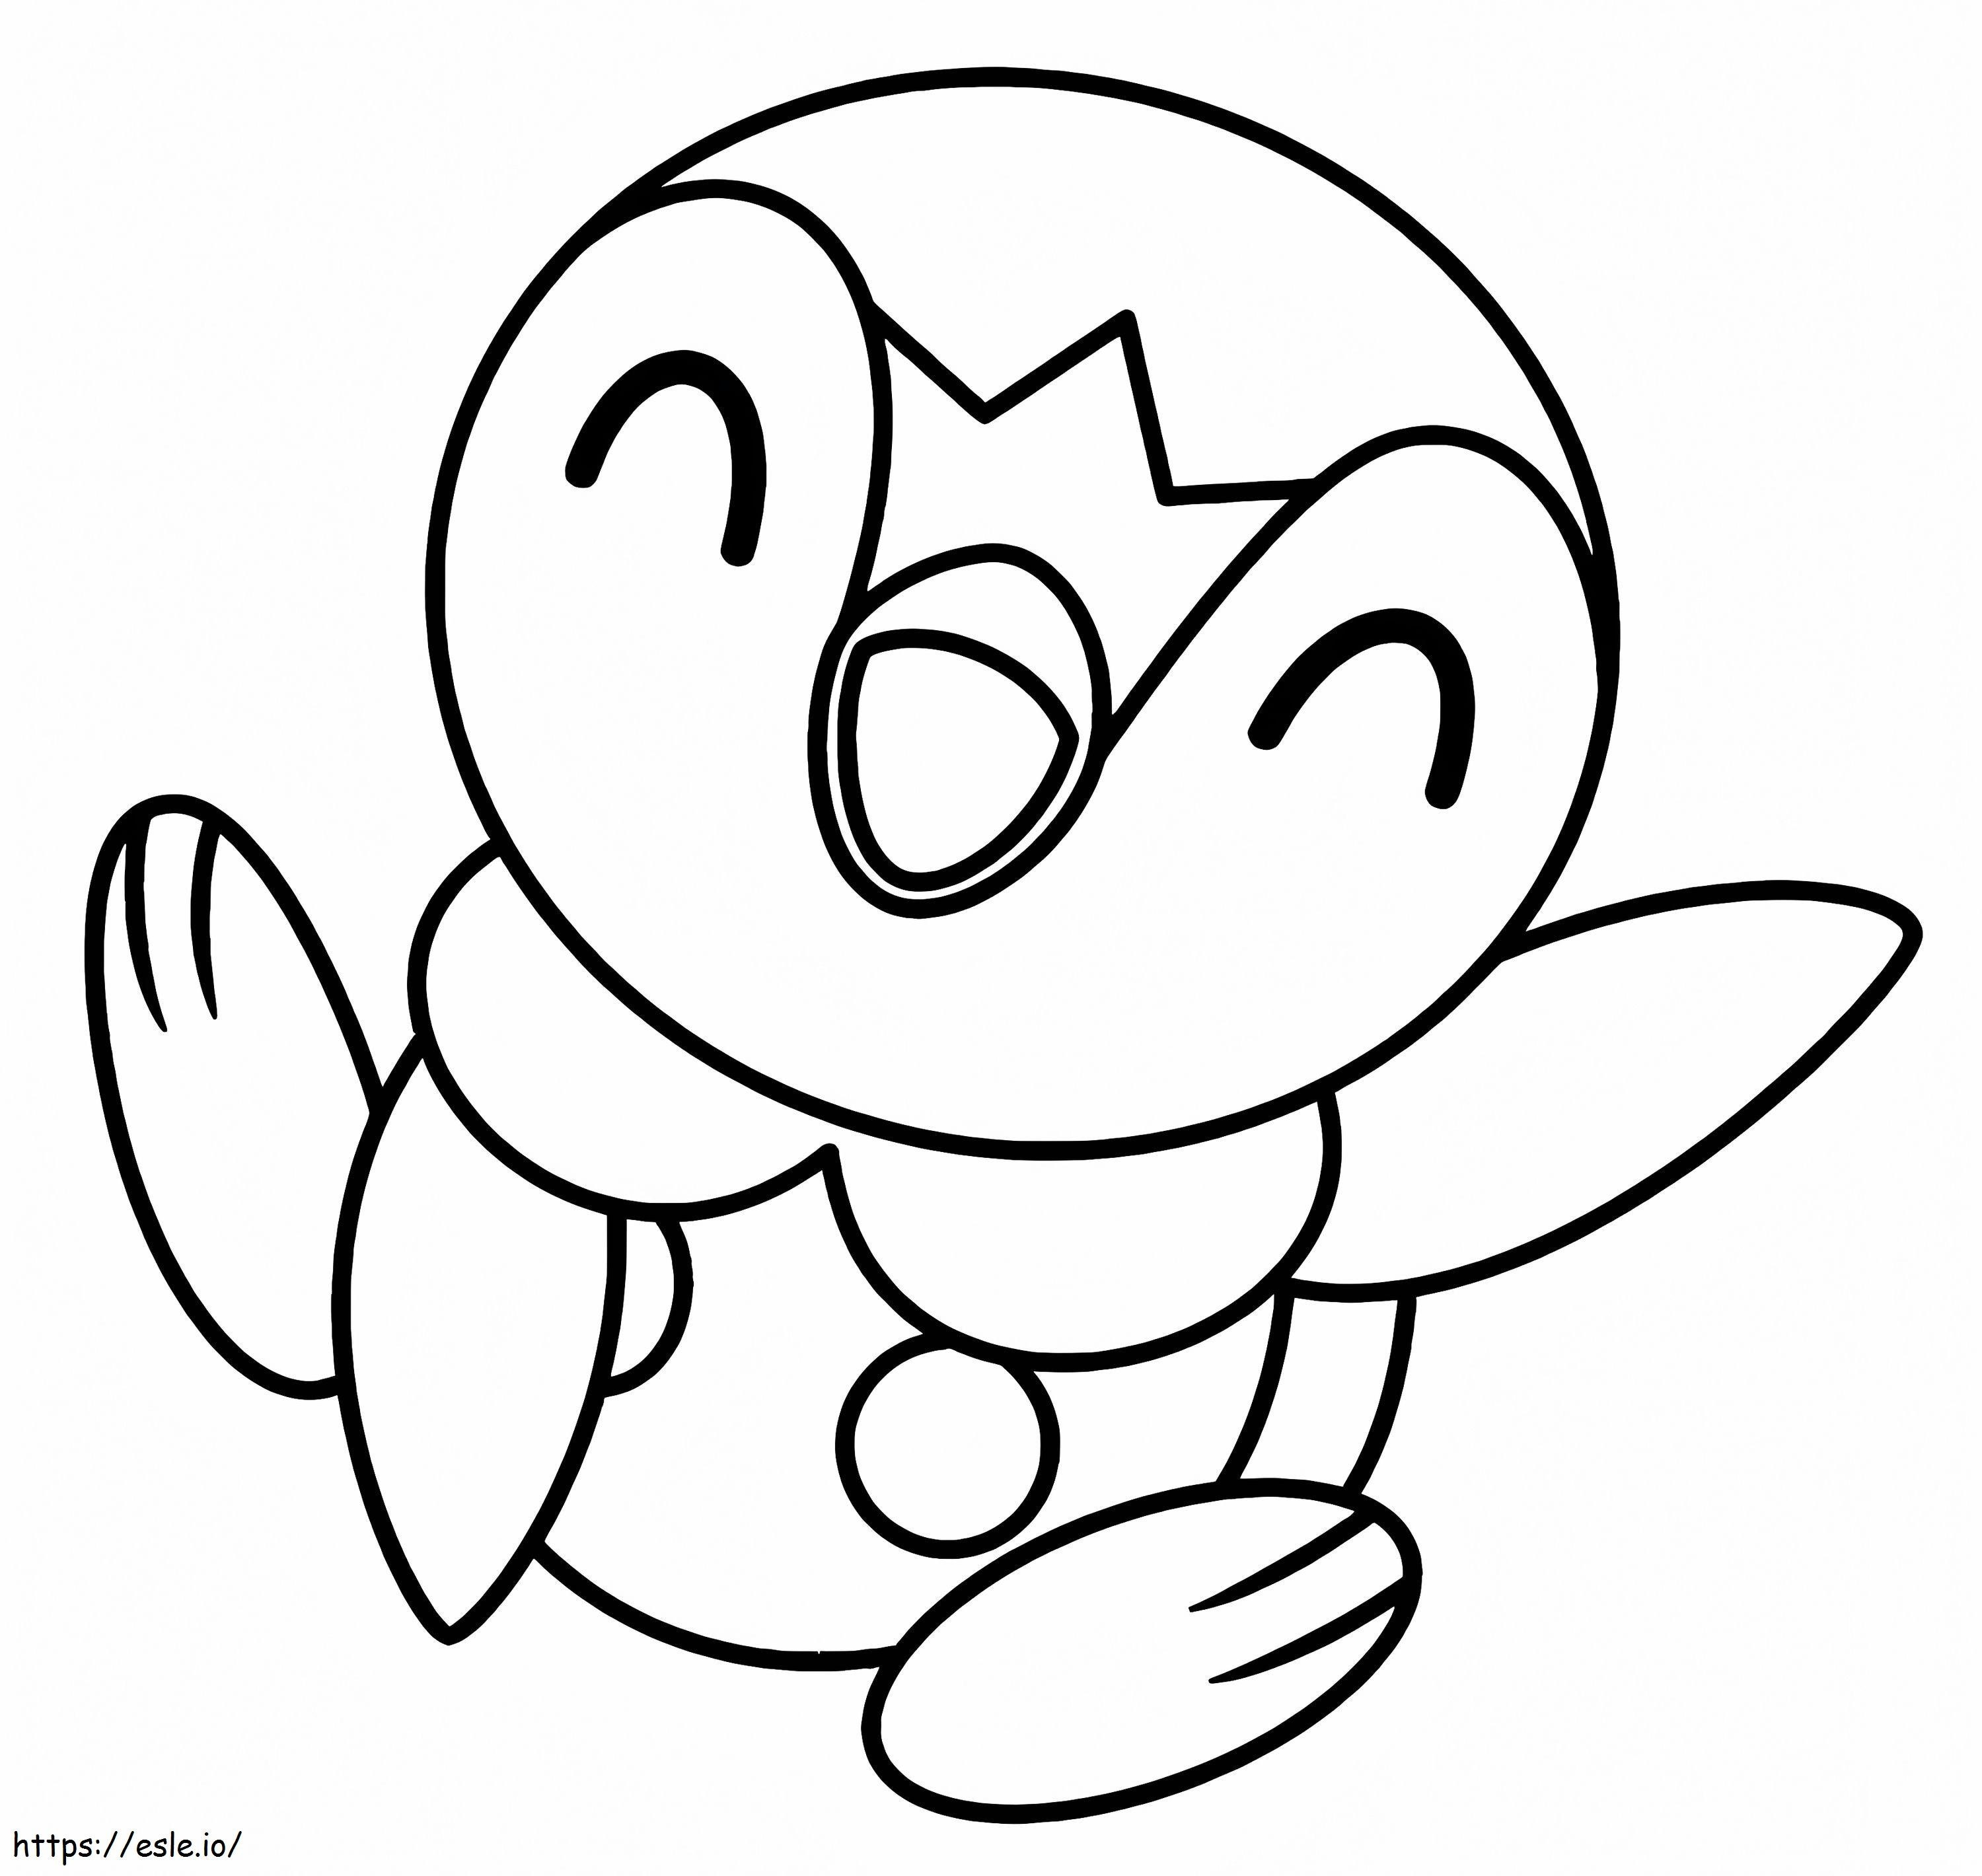 Happy Piplup coloring page